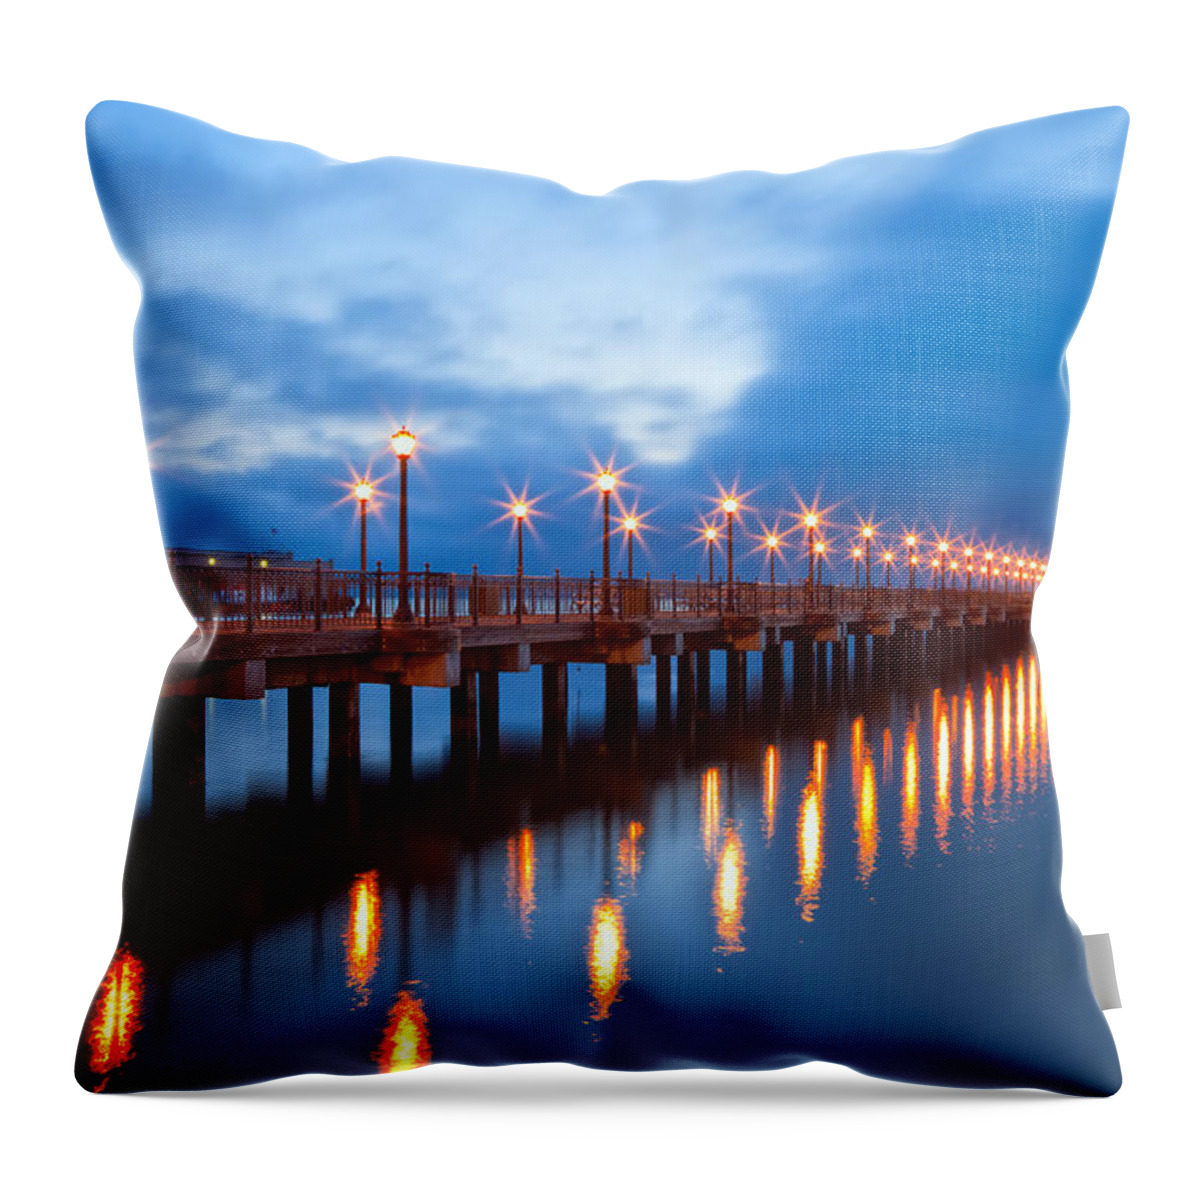 San Francisco Throw Pillow featuring the photograph The Pier by Jonathan Nguyen